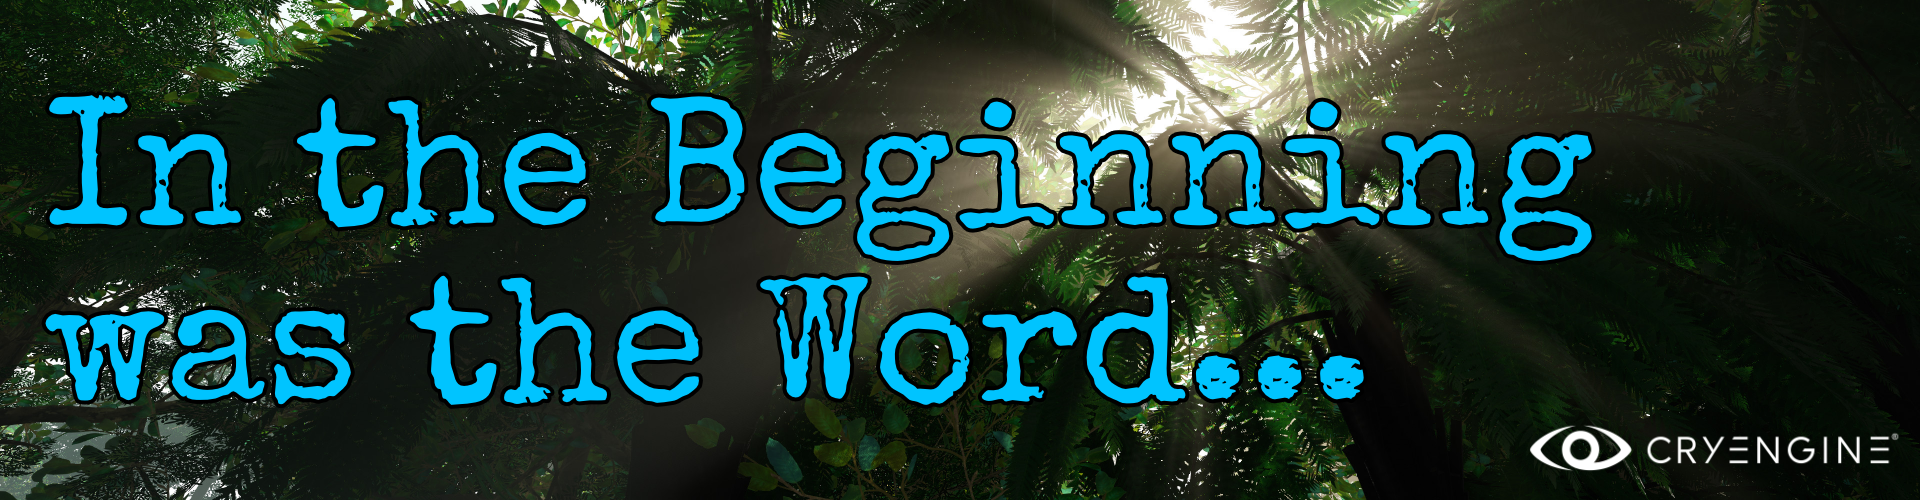 In the Beginning was the Word...